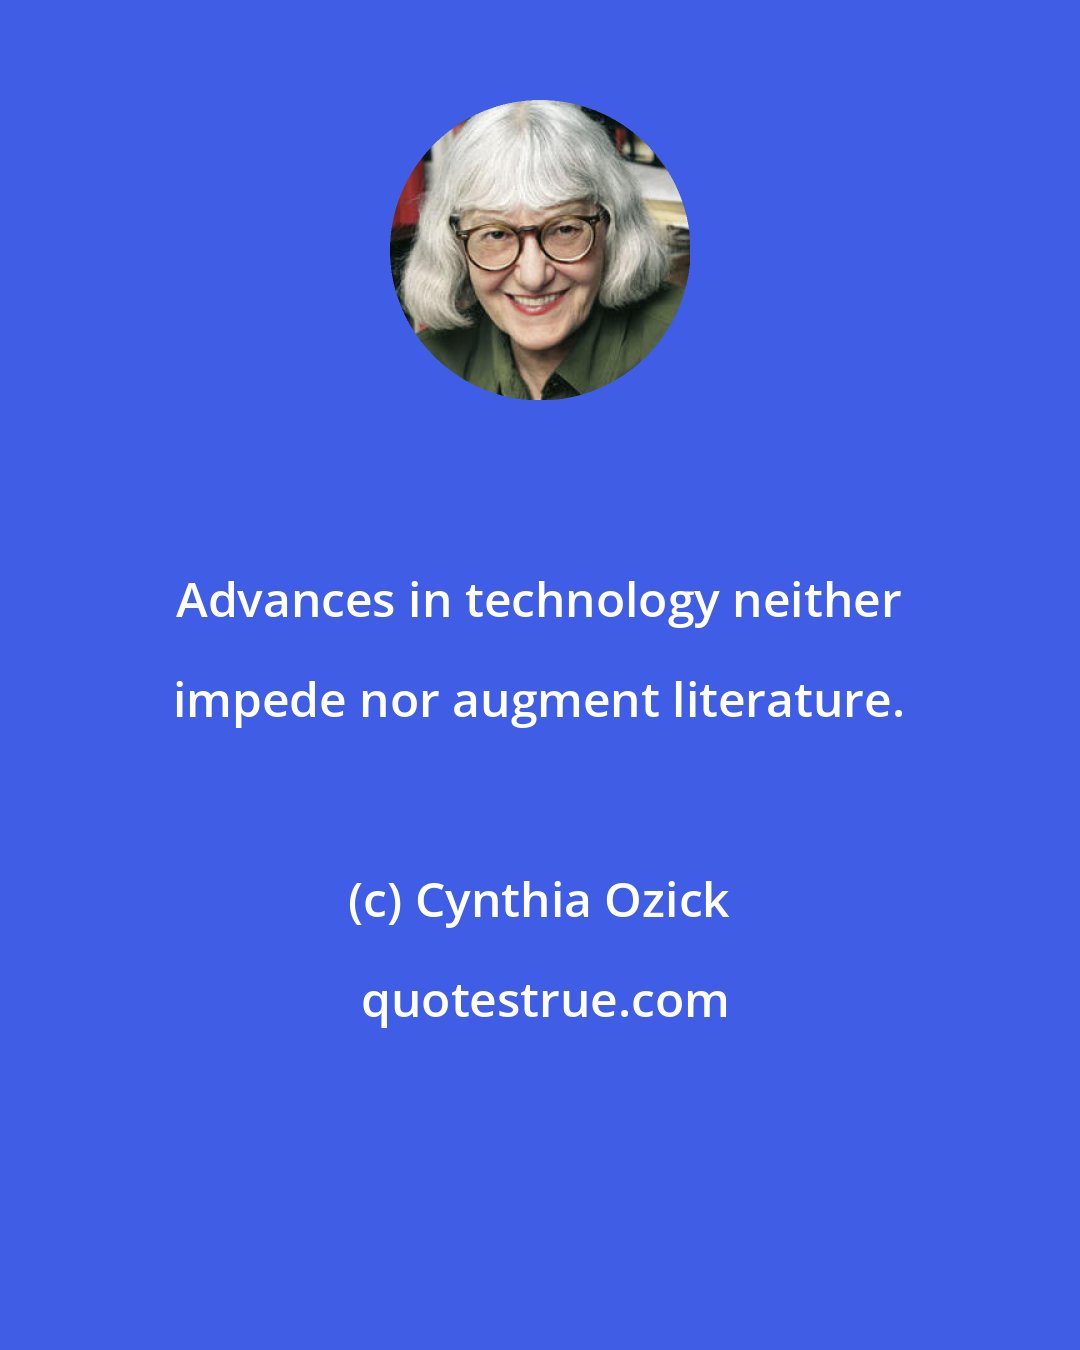 Cynthia Ozick: Advances in technology neither impede nor augment literature.